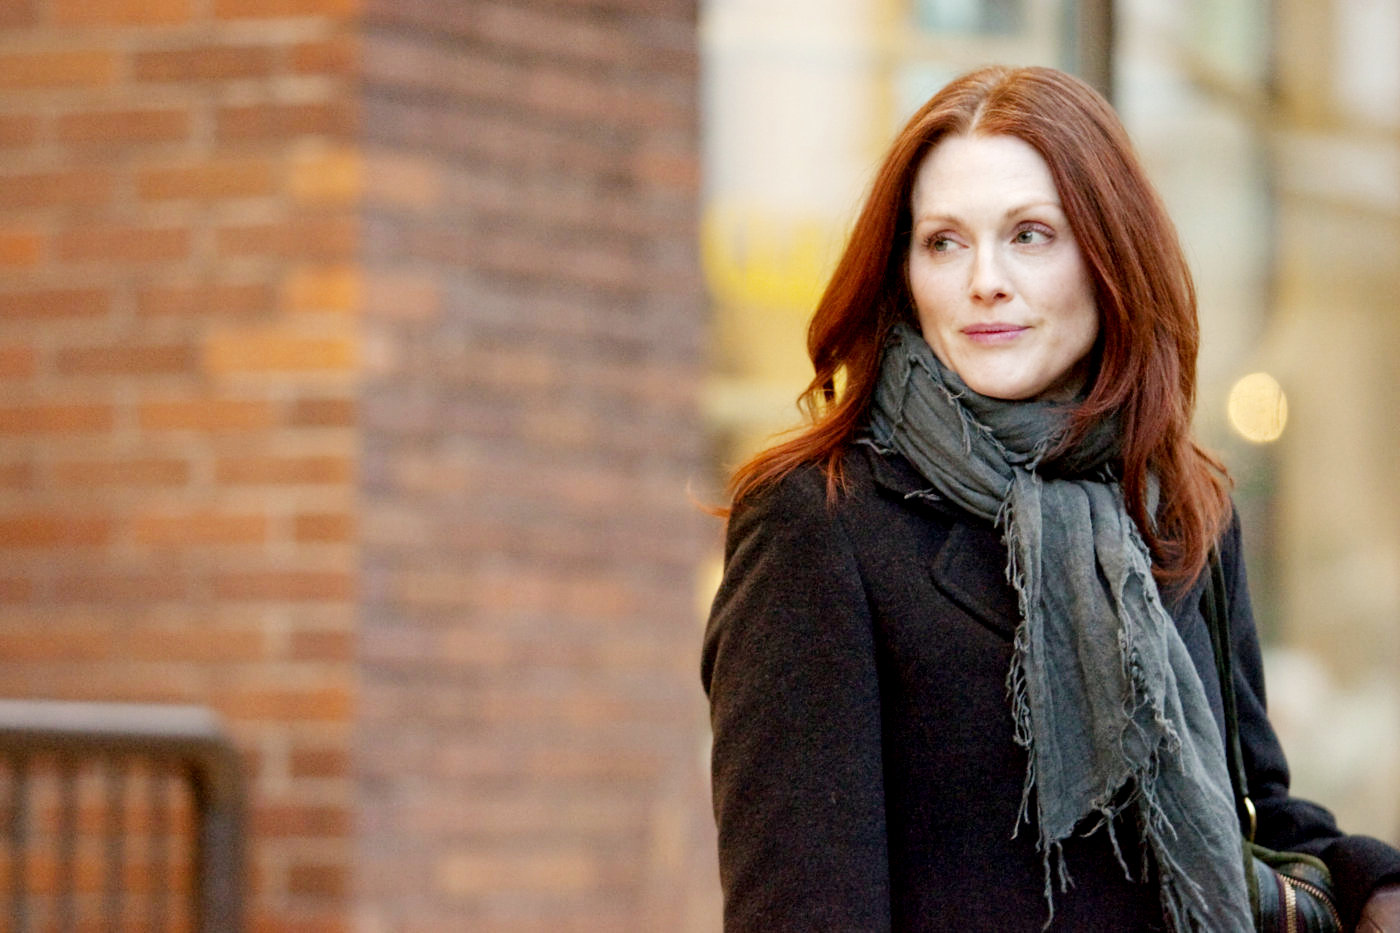 Julianne Moore stars as Catherine in Sony Pictures Classics' Chloe (2010)